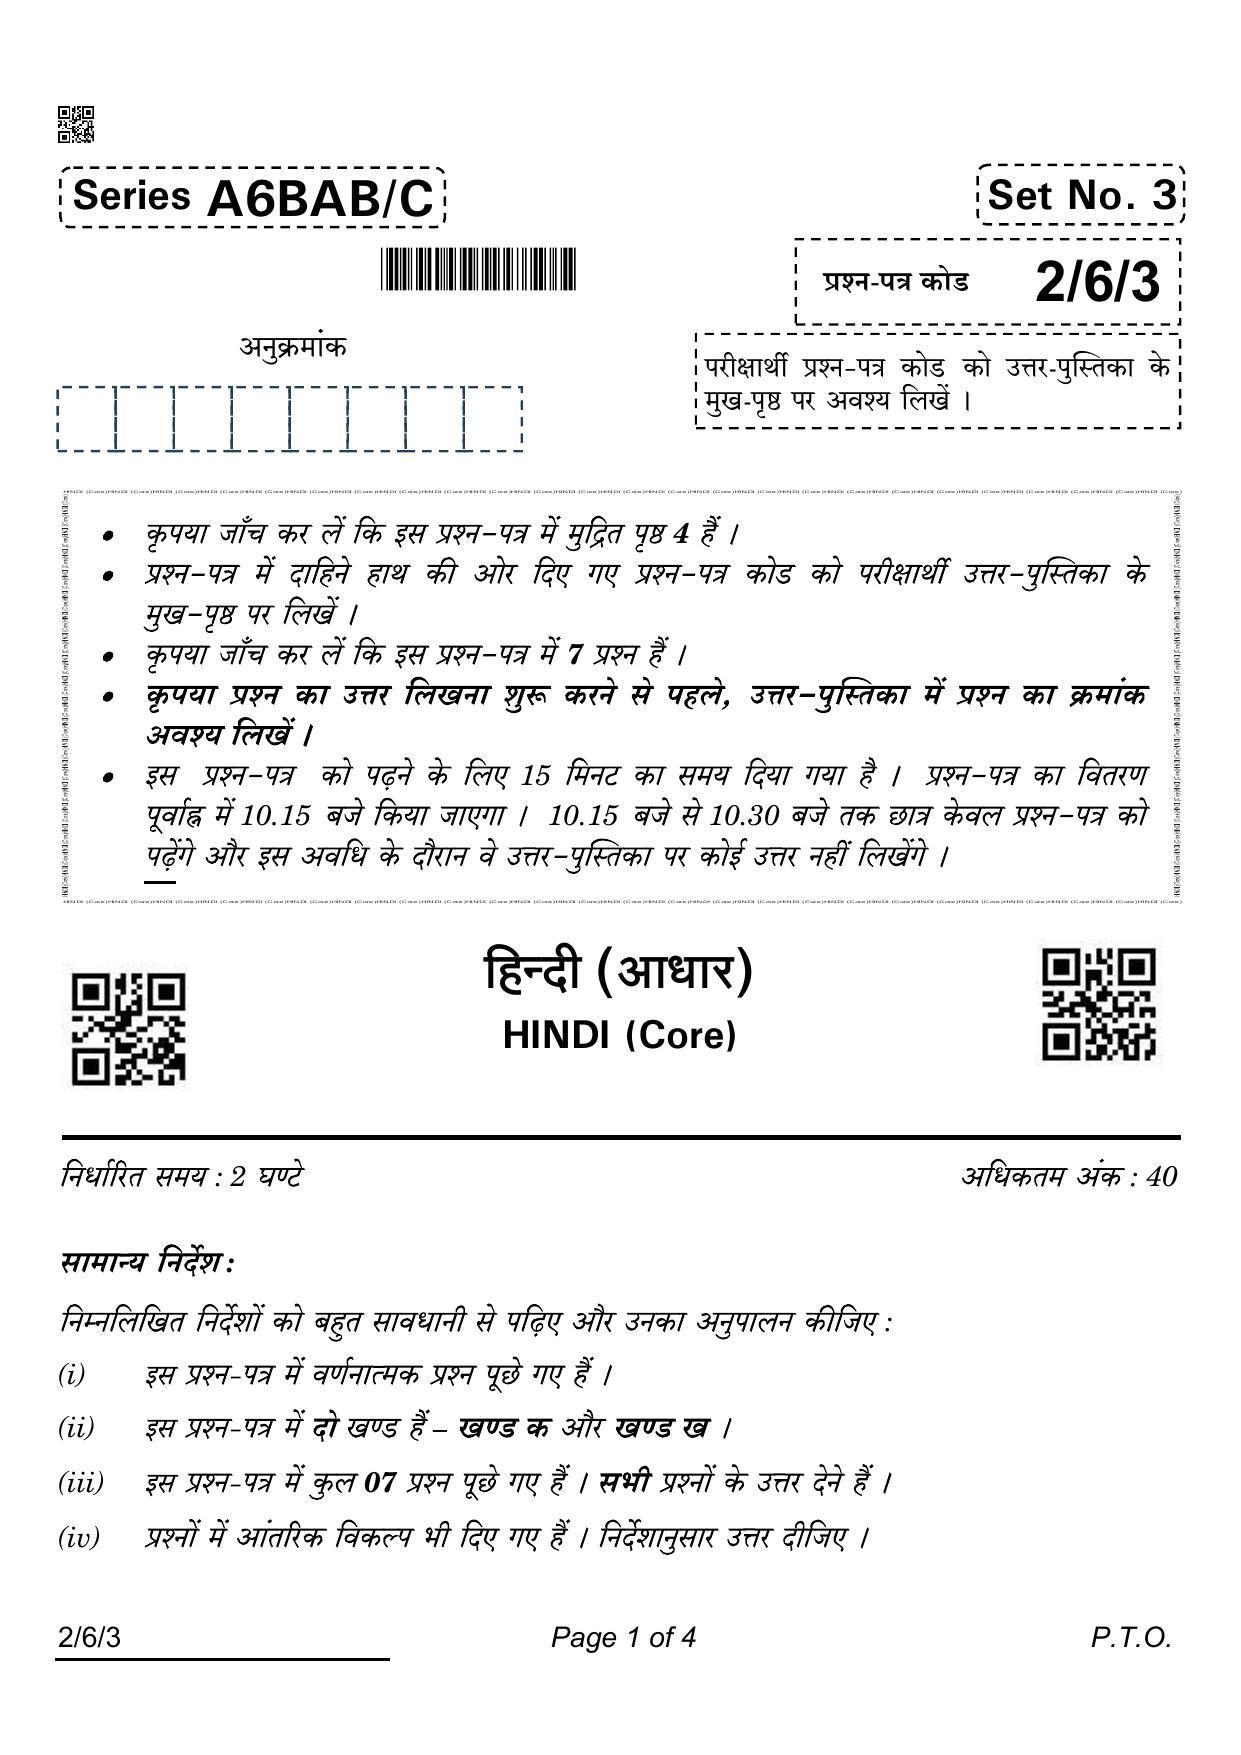 CBSE Class 12 2-6-3 Hindi Core 2022 Compartment Question Paper - Page 1